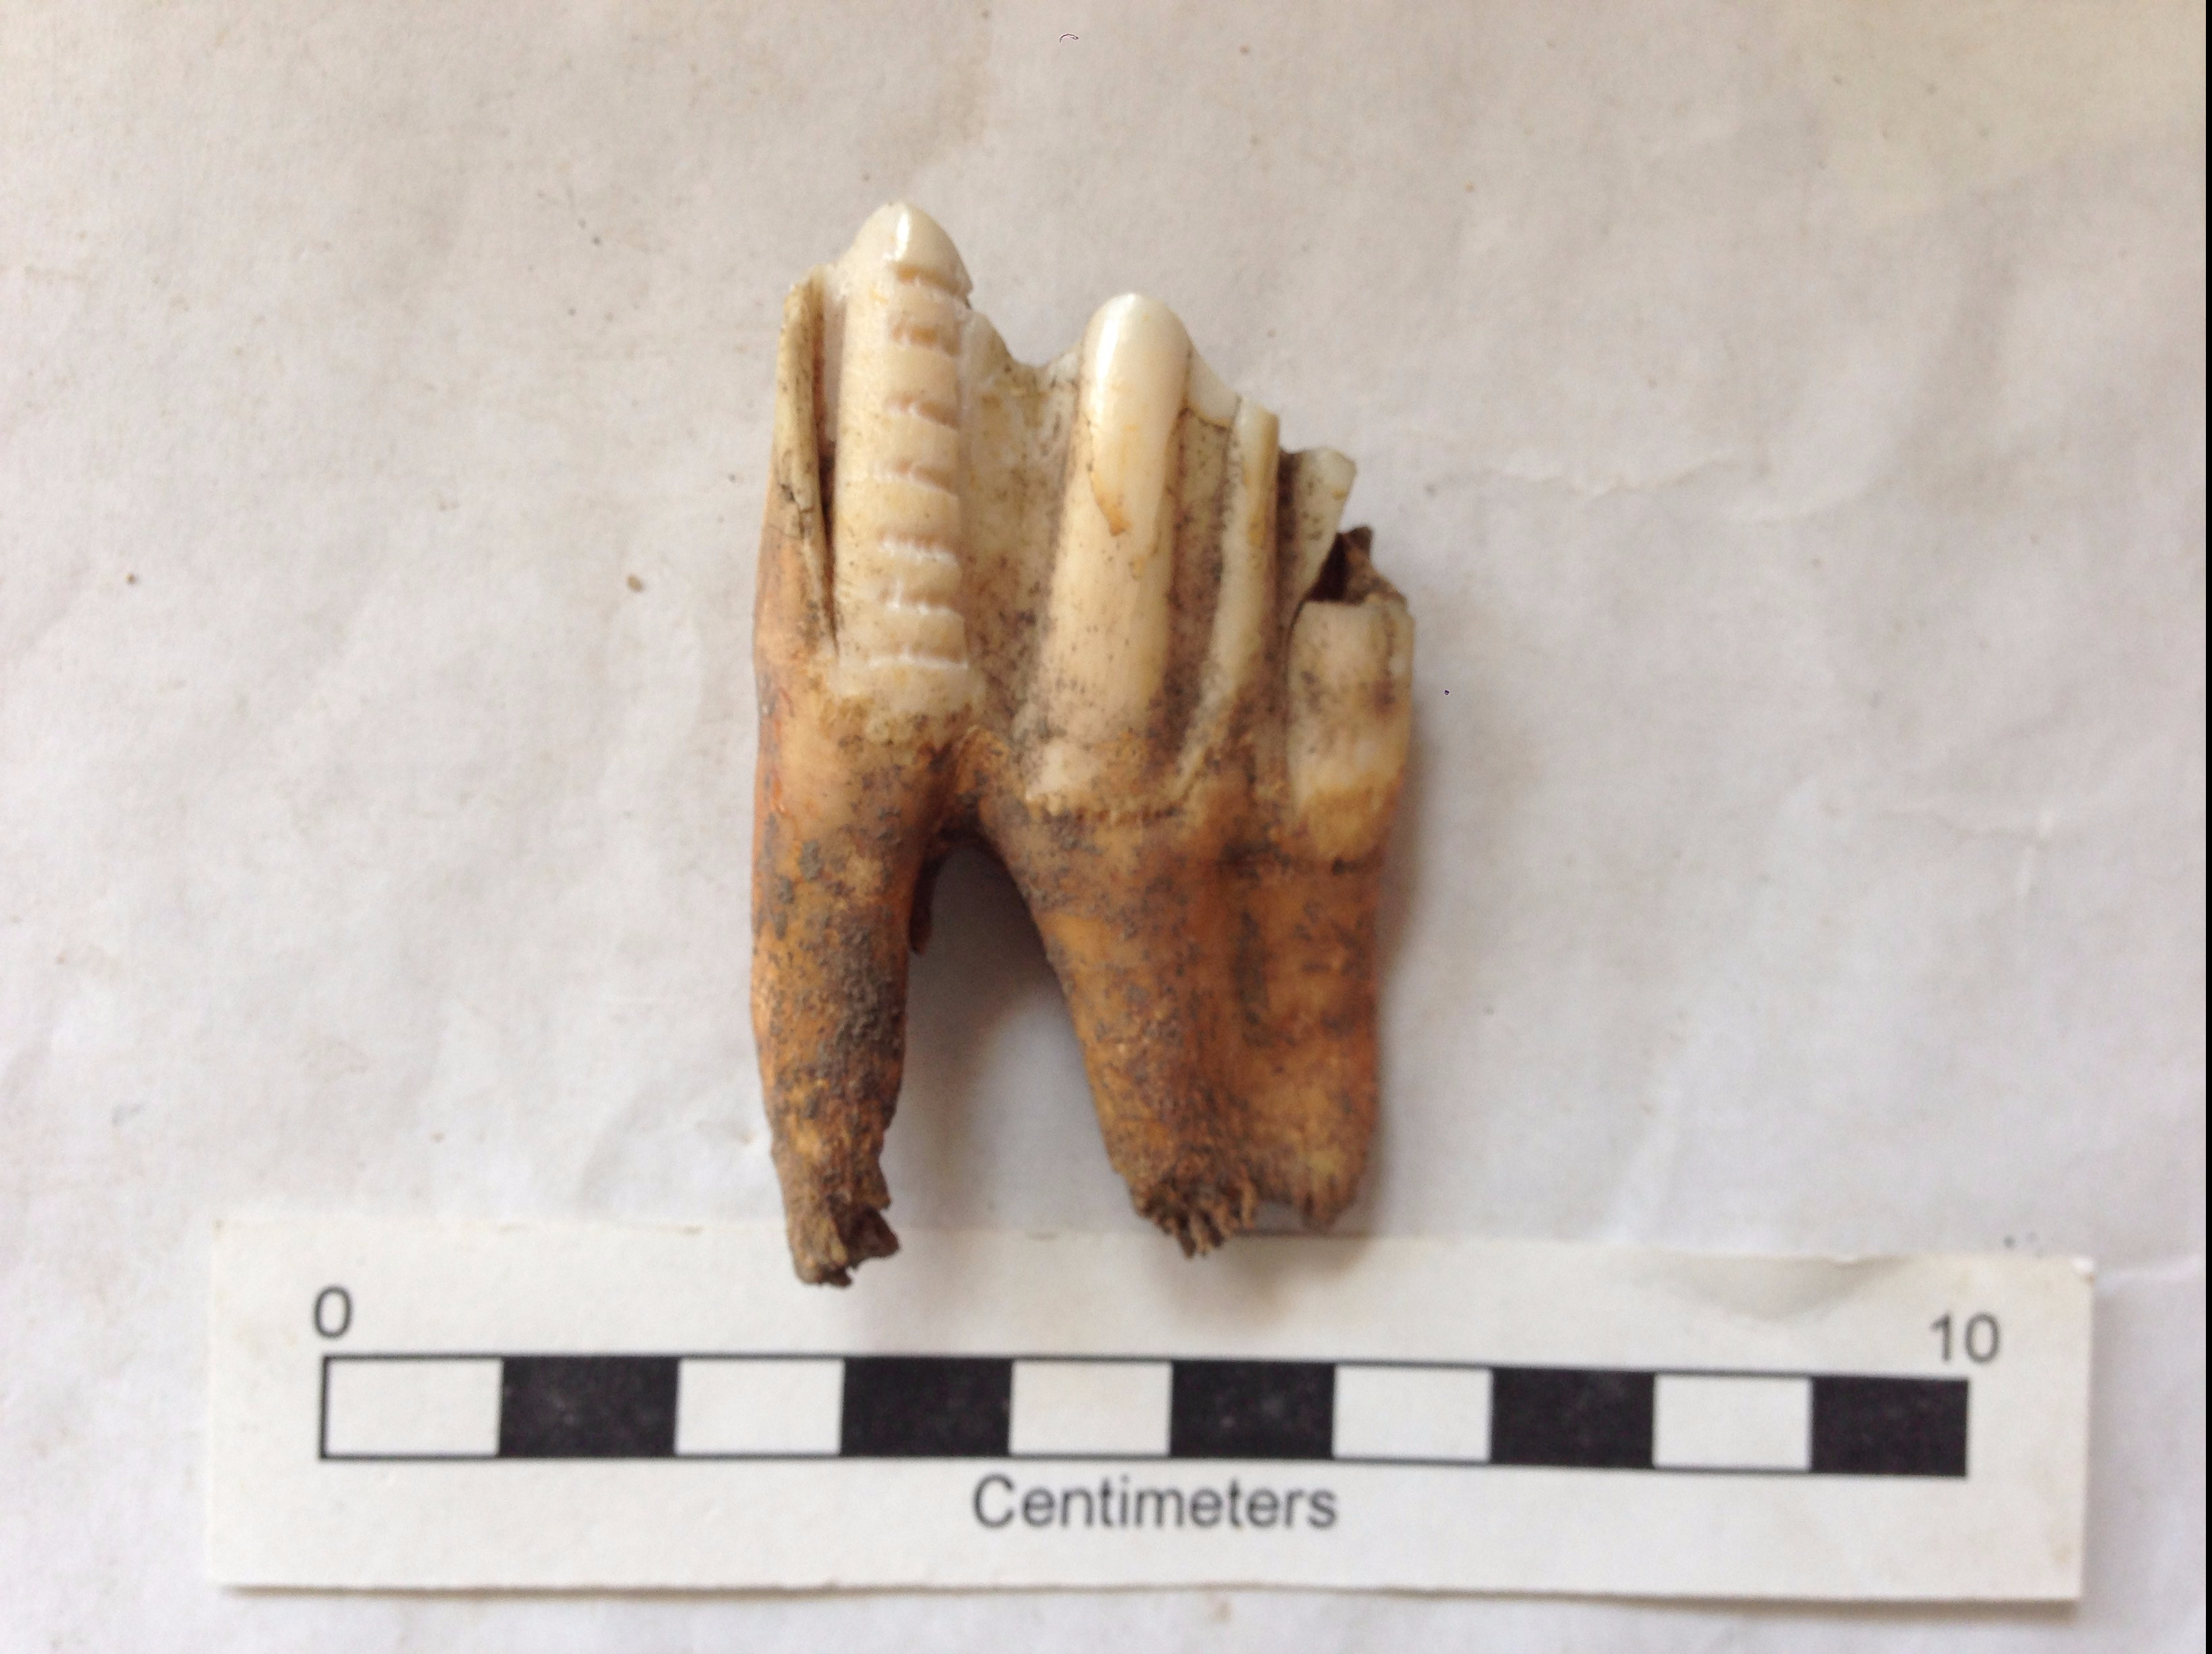 Cow tooth sampled for tooth enamel